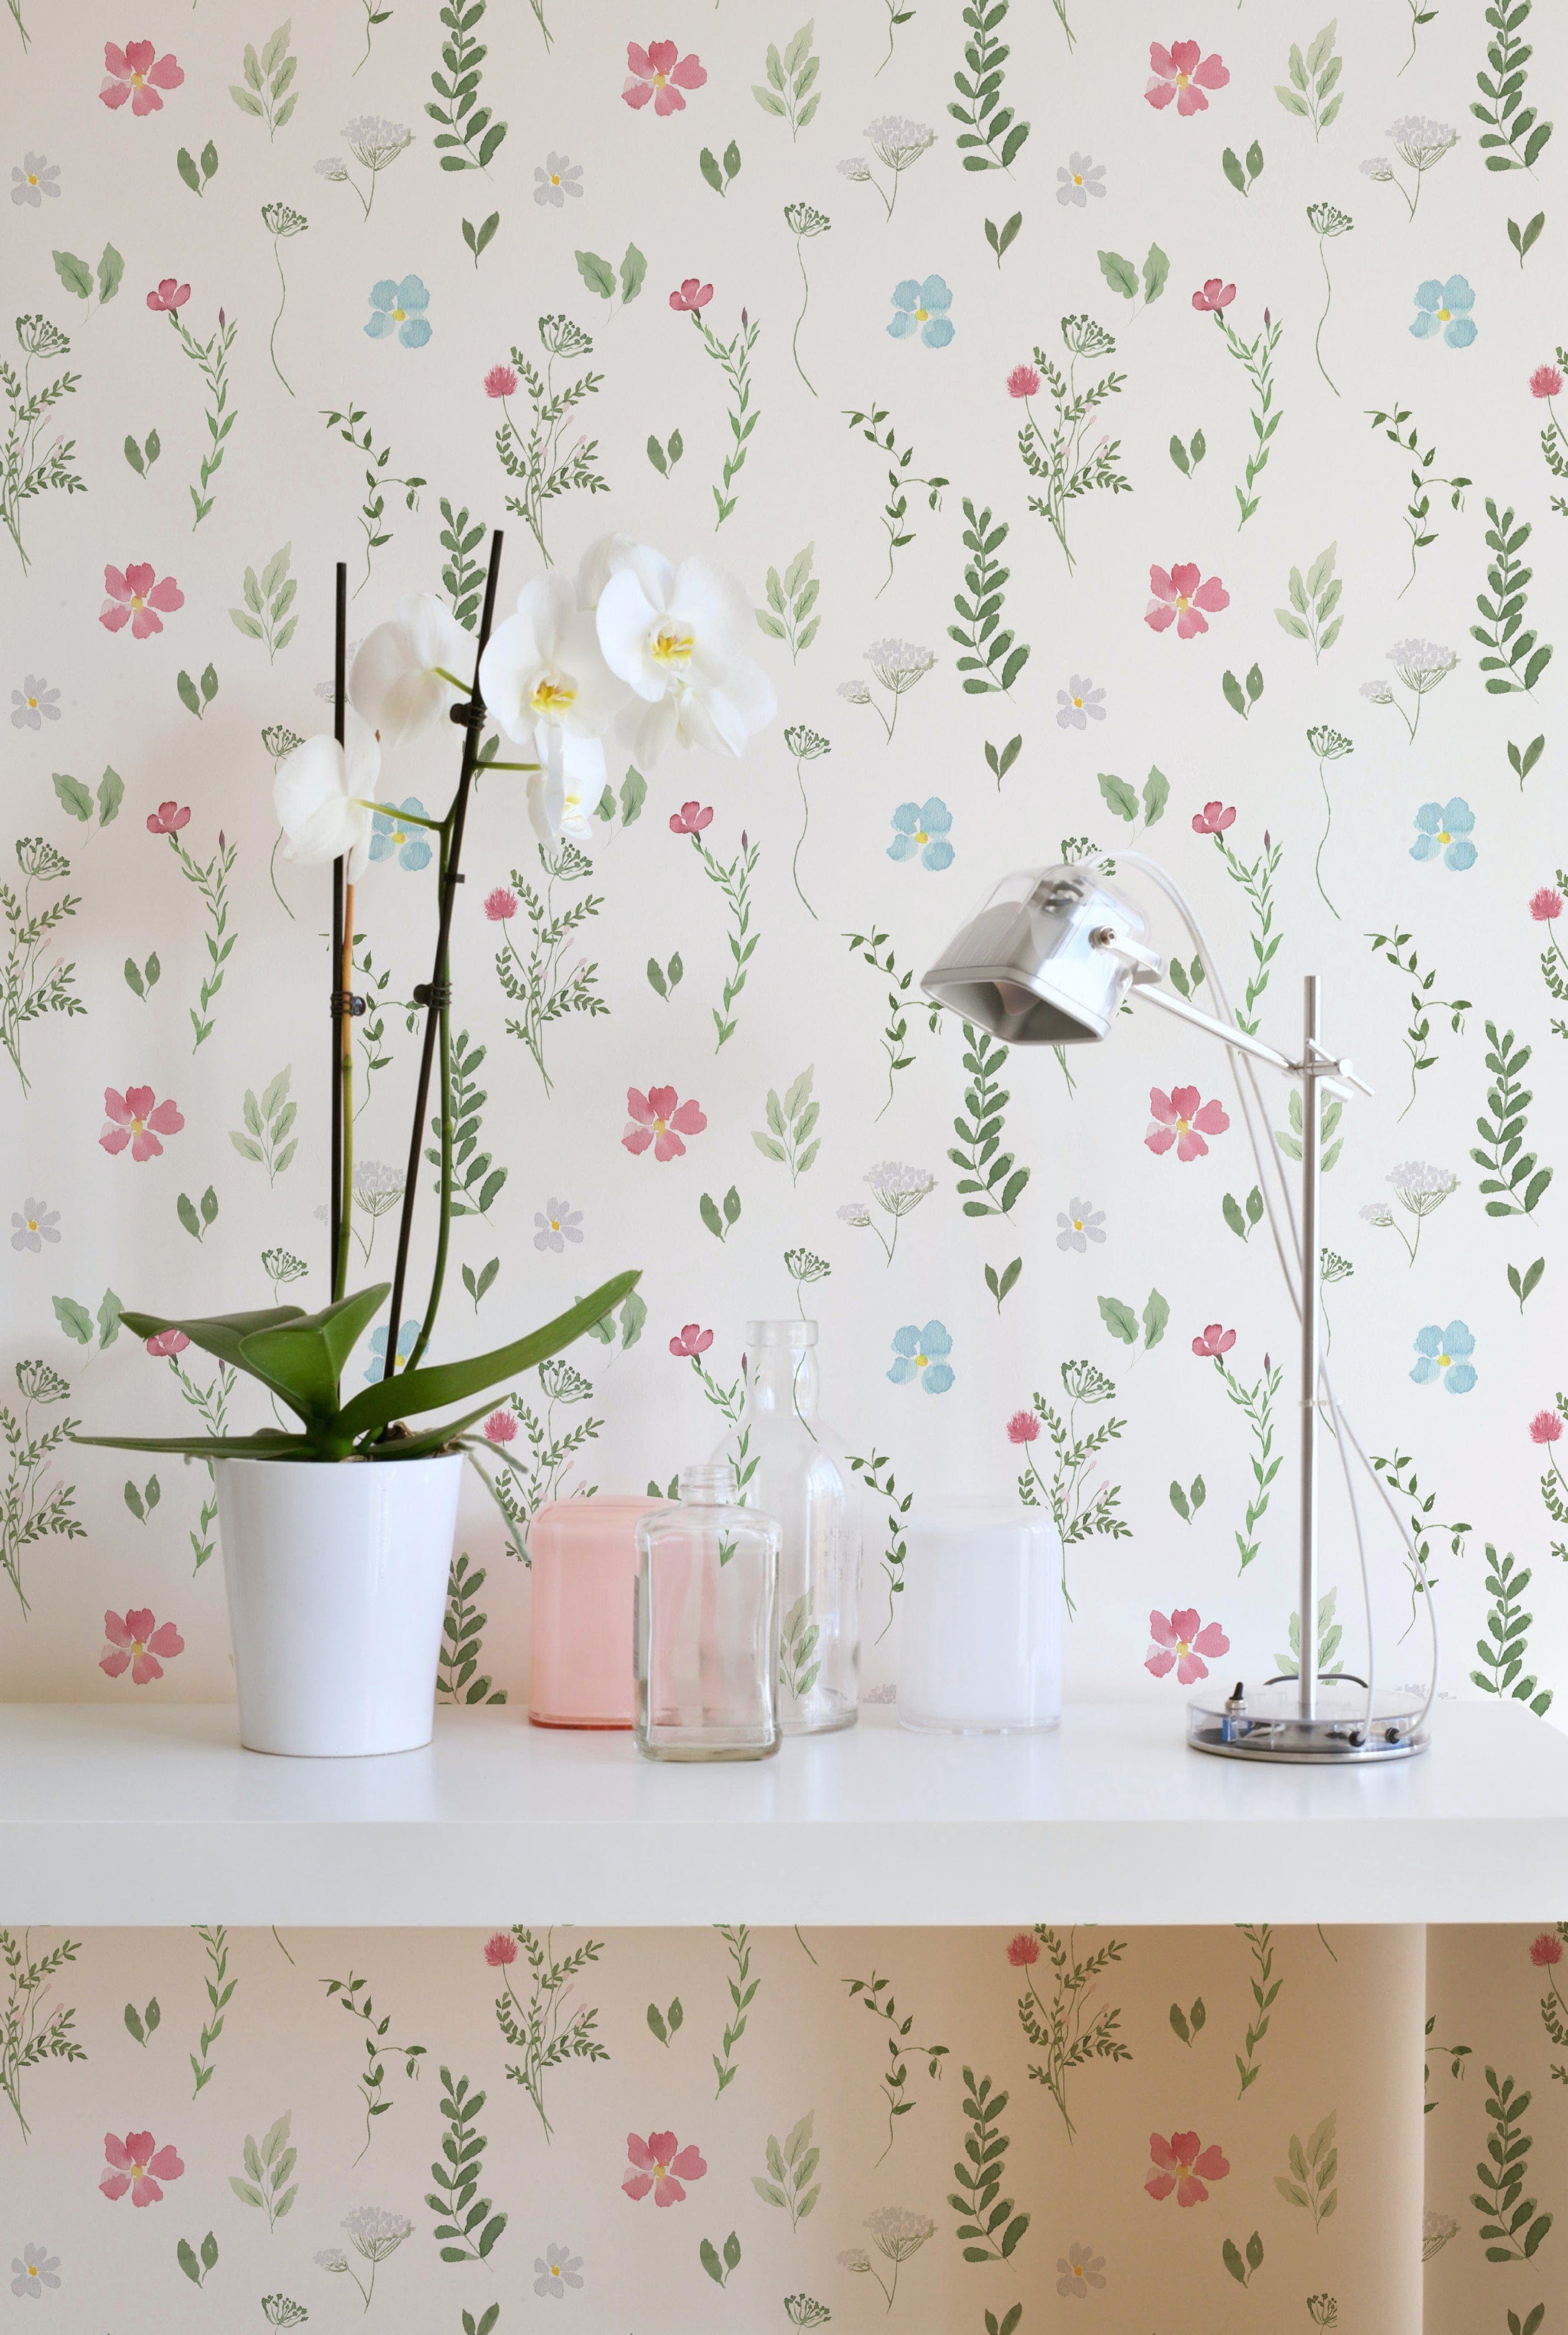 A stylish room corner with the Spring Field Wallpaper - VIII, highlighting its elegant floral pattern in pink, blue, and yellow hues. The decor includes a white orchid in a pot and a sleek metallic desk lamp on a white desk